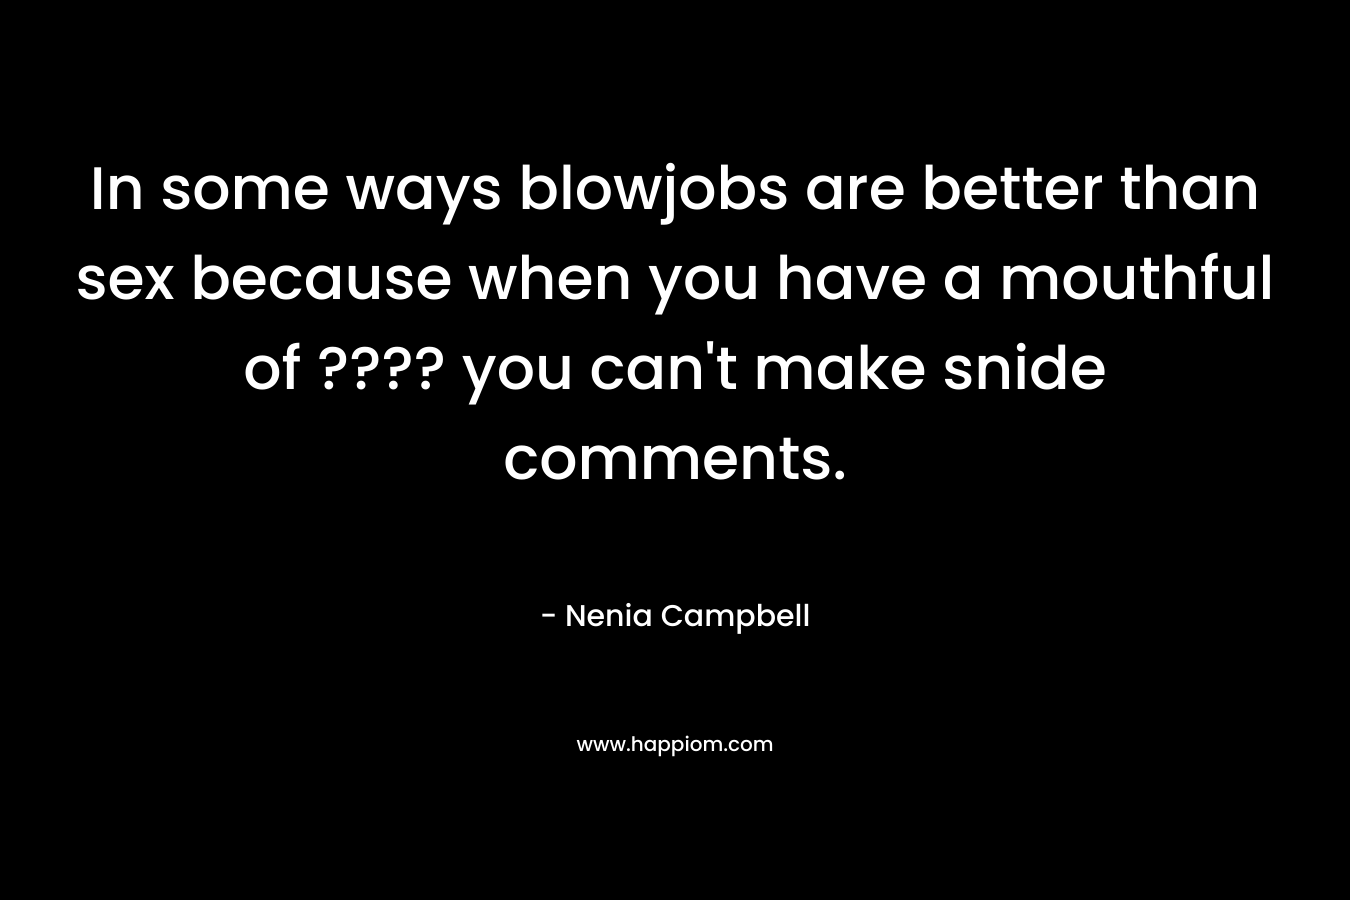 In some ways blowjobs are better than sex because when you have a mouthful of ???? you can't make snide comments.